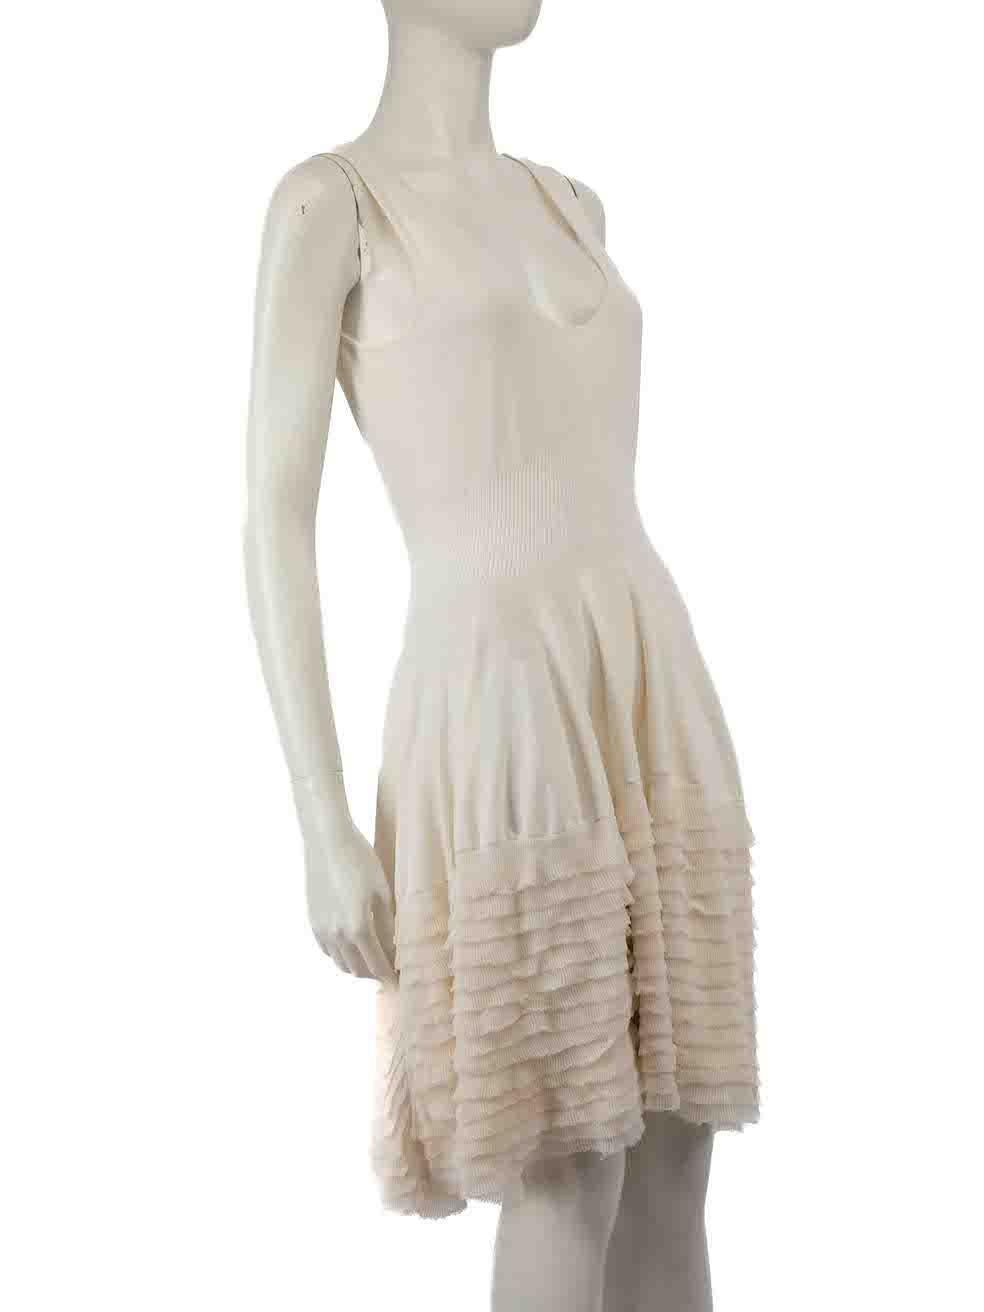 CONDITION is Very good. Minimal wear to dress is evident. Minimal wear to the front around the neckline is seen with discolouration marks and a few pulls to the weave at the hemline on this used Alexander McQueen designer resale item. Please note